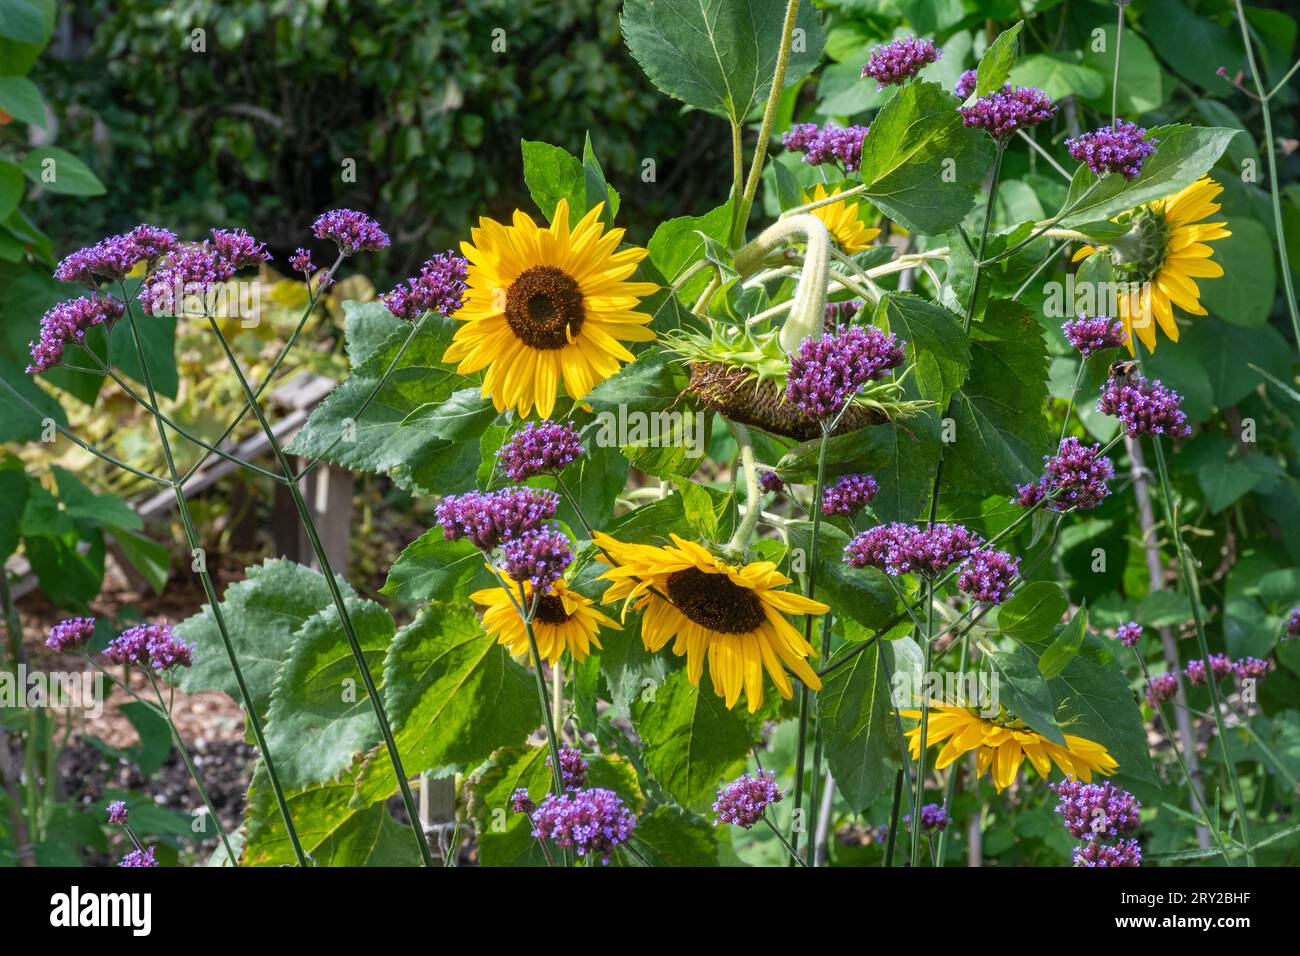 Sunflowers and purpletop vervain (Verbena bonariensis) flowers in a wildlife garden, attractive to bees and butterflies, England, UK Stock Photo